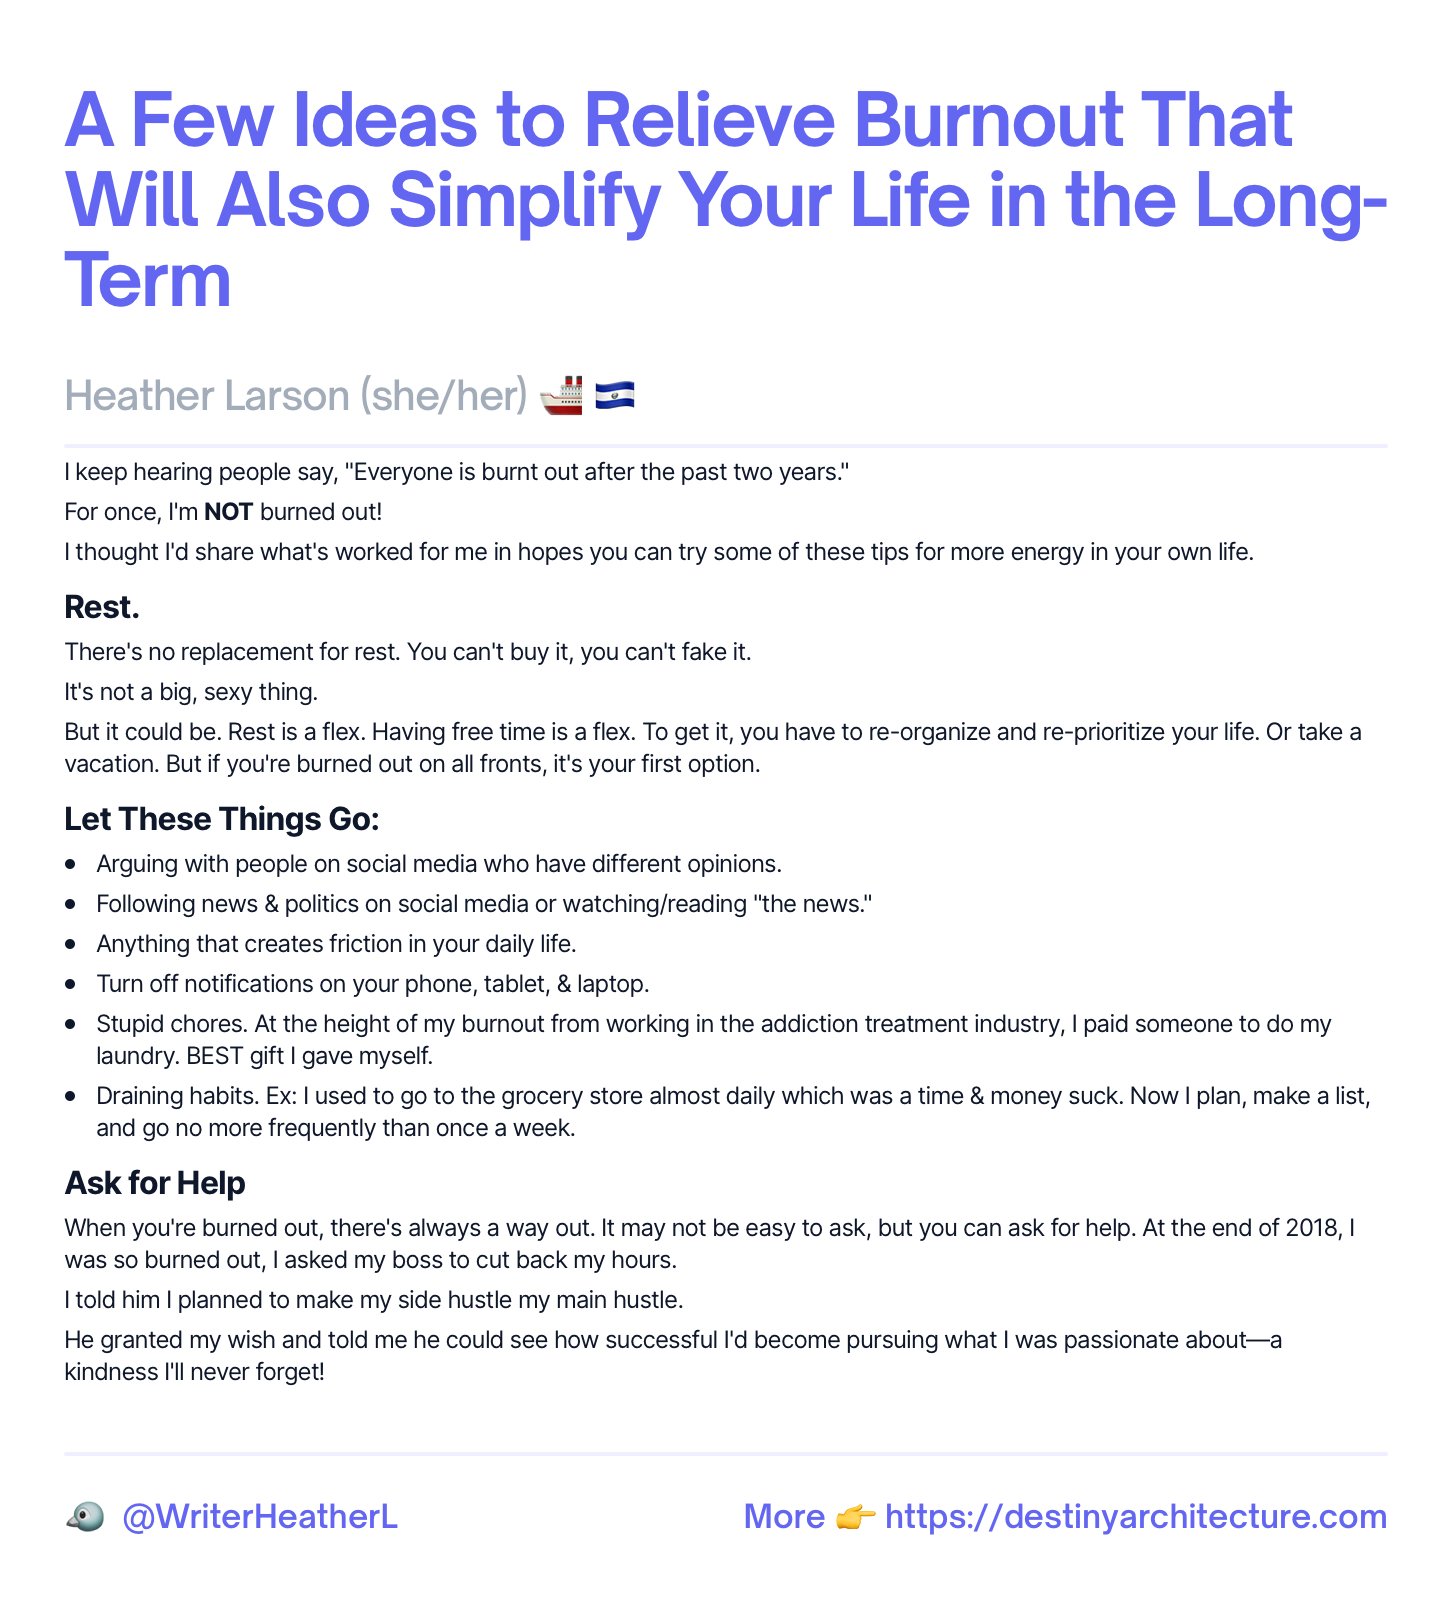 How To Avoid Burnout with a Few Simple Changes You Can Make Today